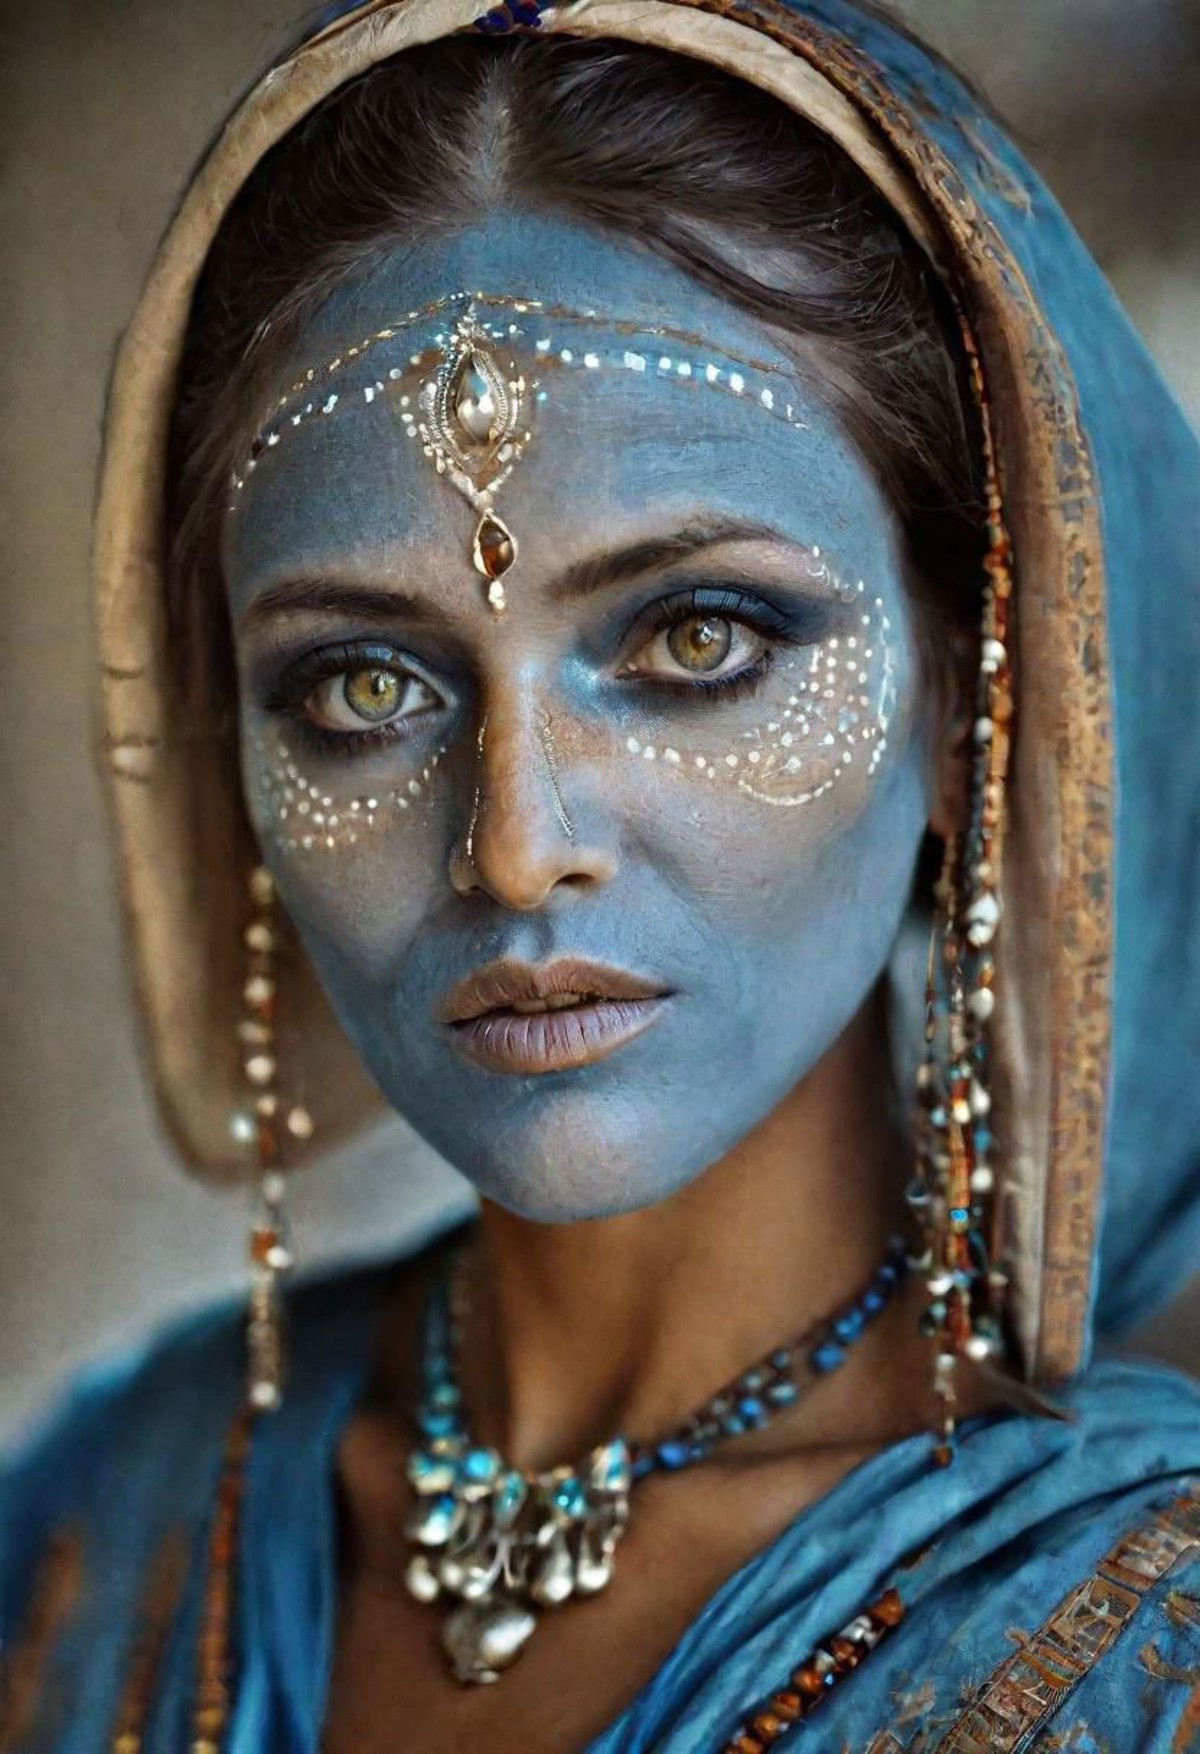 Photography in (stvmccrr style), a beautiful blue genie woman with striking silver eyes, wearing a loose tunic, blue skin,...